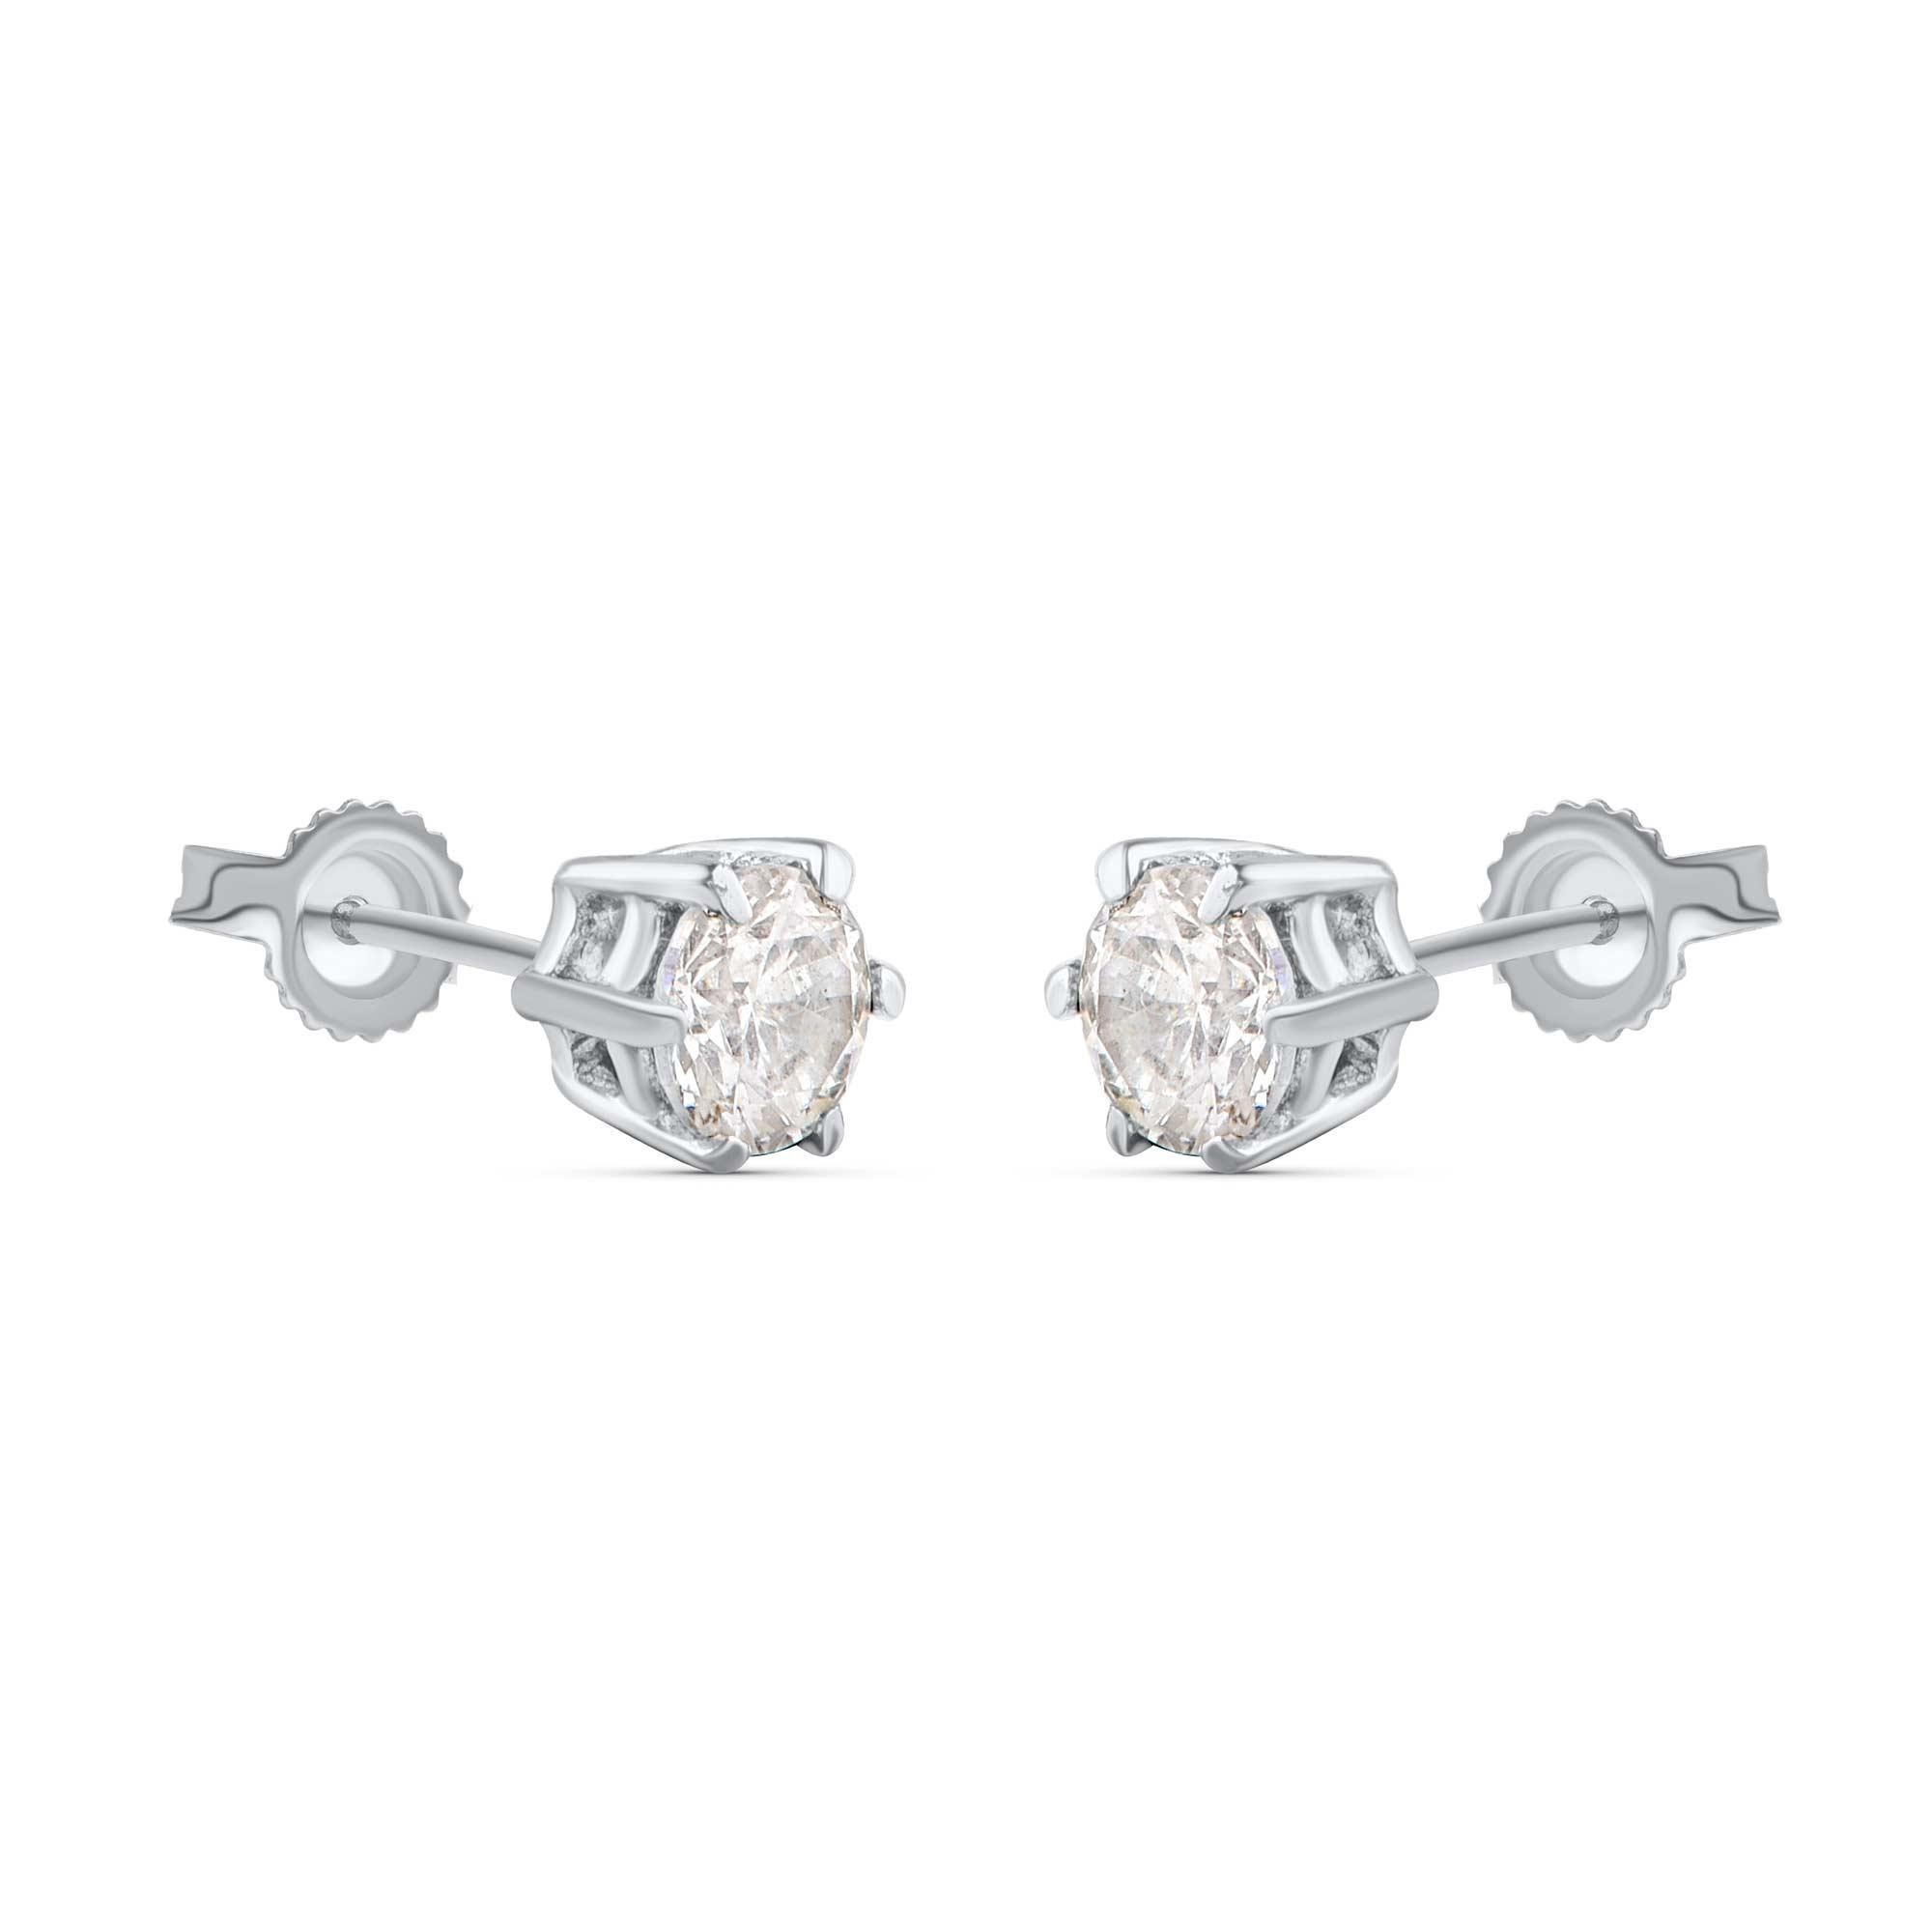 Shines brightly with two brilliant-cut diamonds set in prong setting and beautifully crafted in 18-karat white gold. Diamonds are graded H Color, I1 Clarity and the total diamond weight is 0.25 carats. These stud earrings secure easily with post and